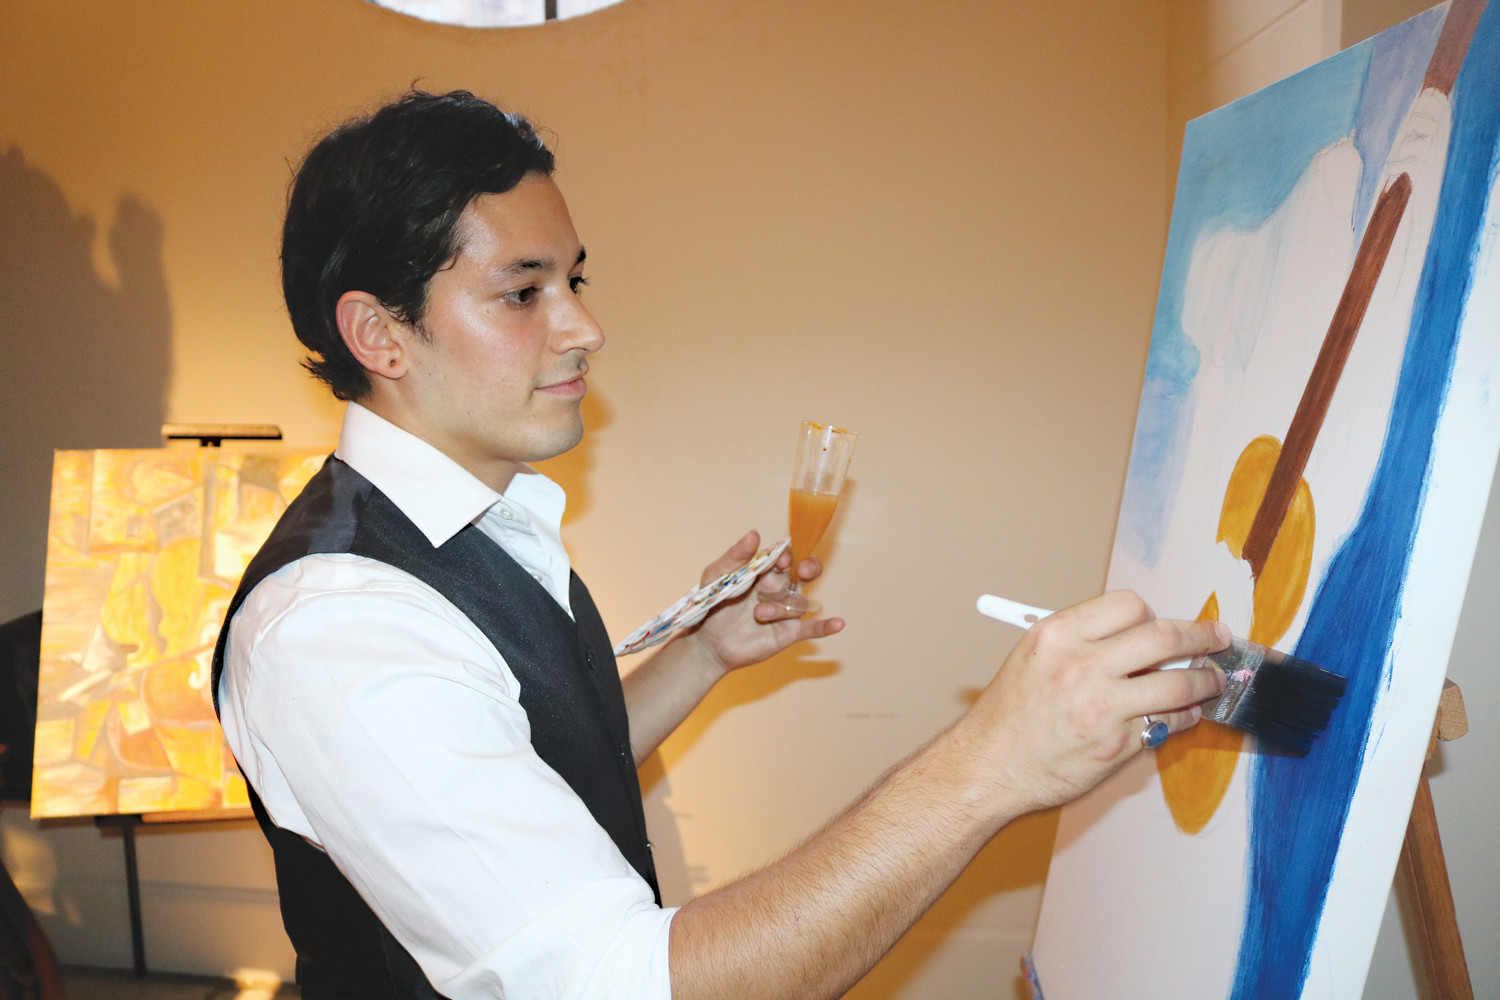 “Pablo Picasso” paints for his fans at the charity event.